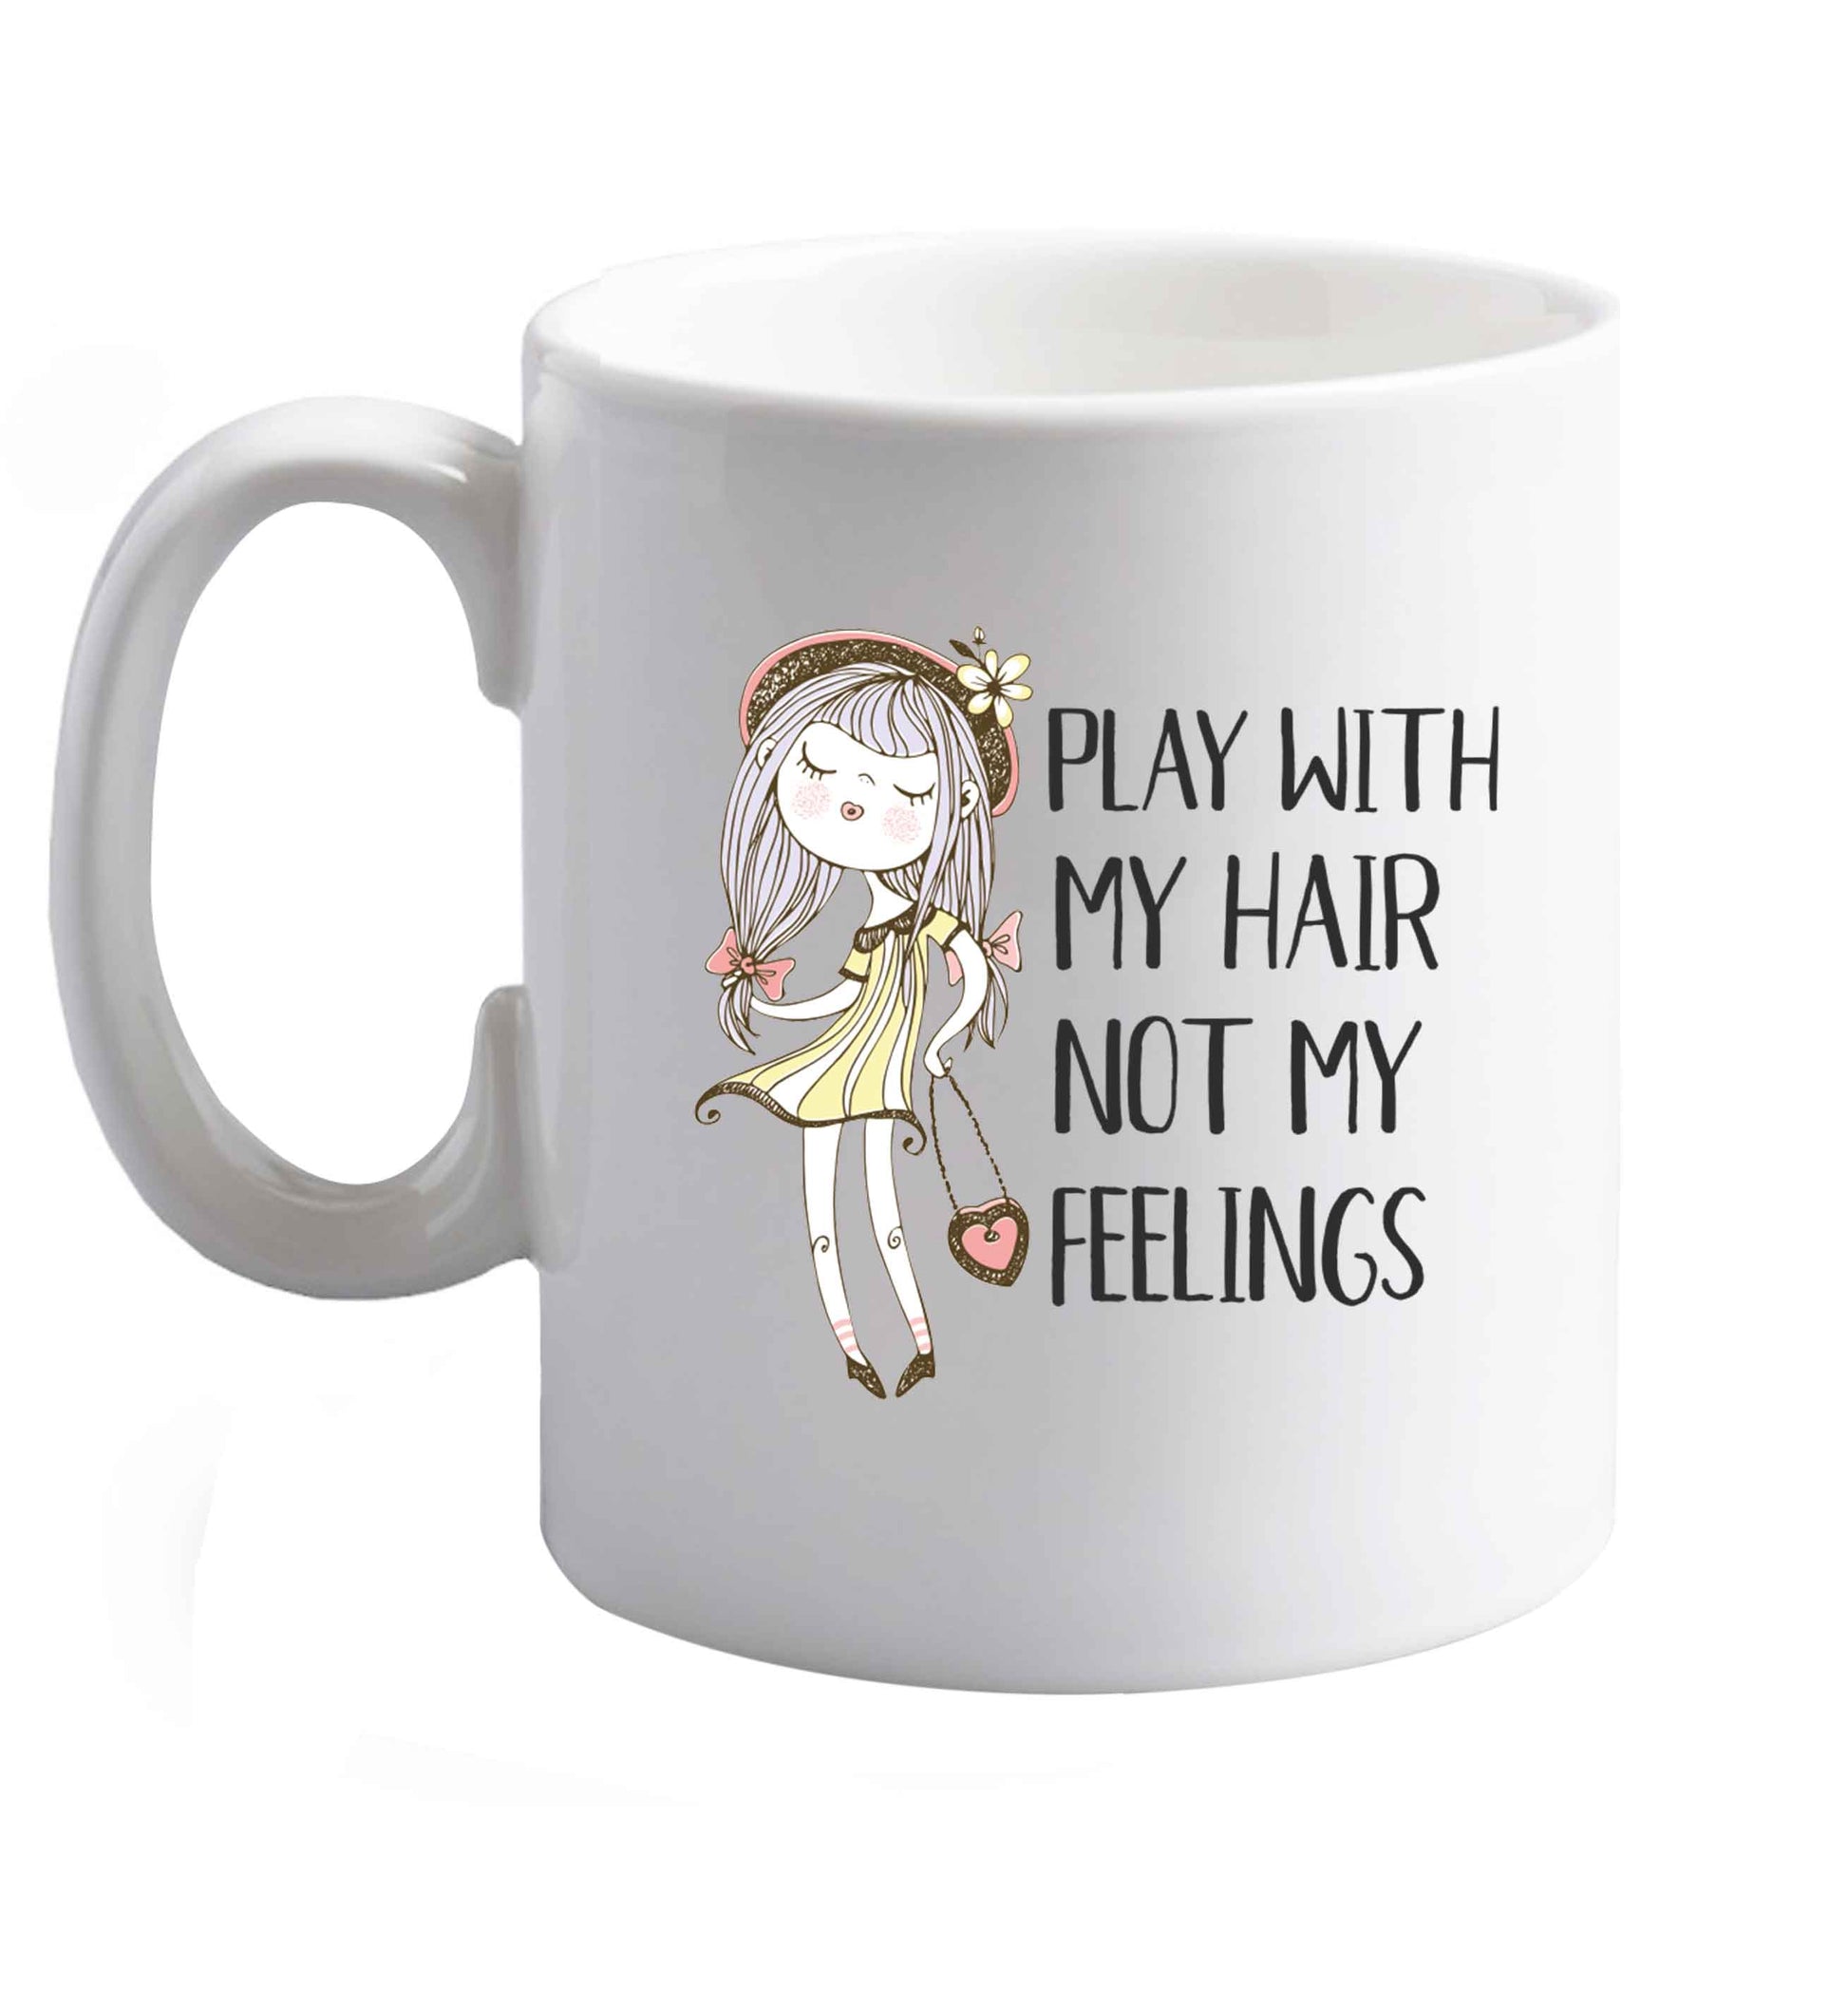 10 oz Play with my hair not my feelings illustration  ceramic mug right handed